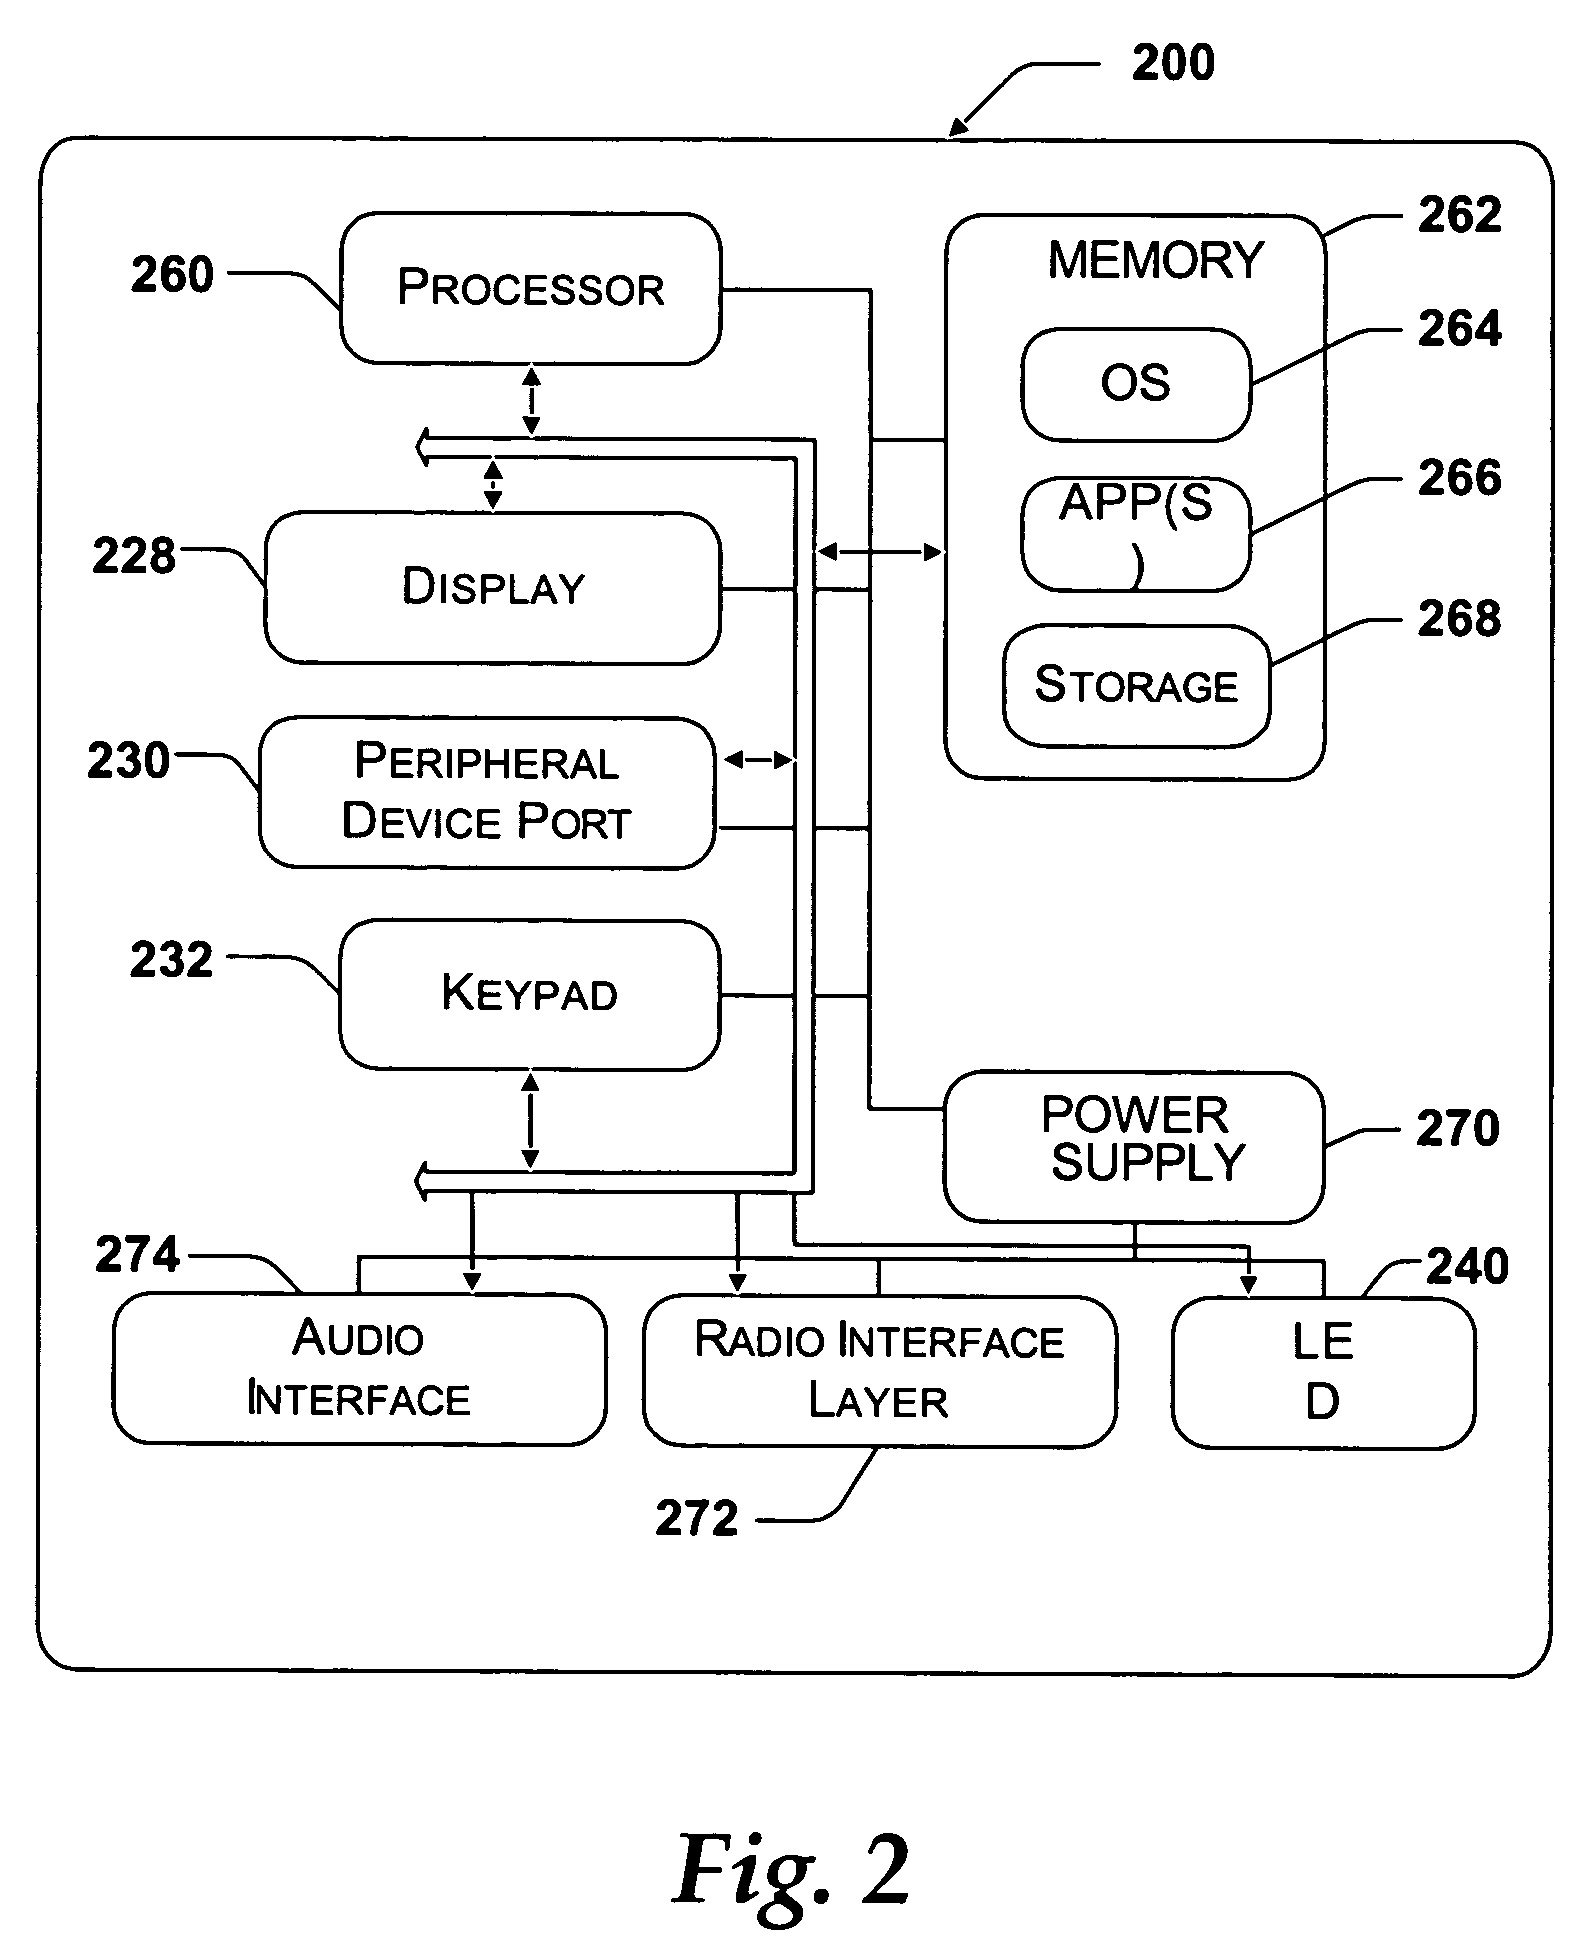 Method and system for masking dynamic regions in a user interface to enable testing of user interface consistency